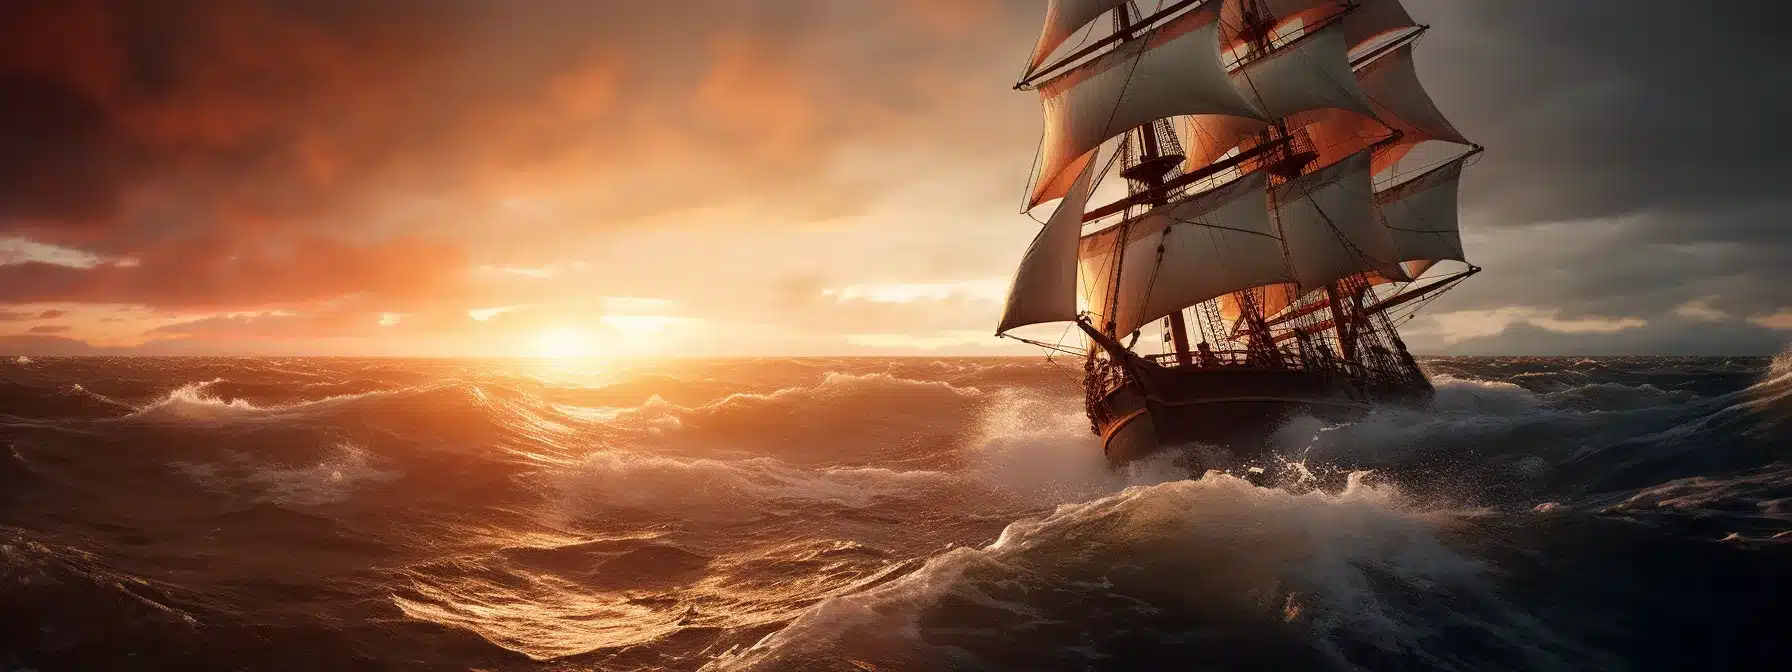 A Ship With A Brand Flag Sailing Through Stormy Waters Towards The Sunset, Avoiding Rocks.